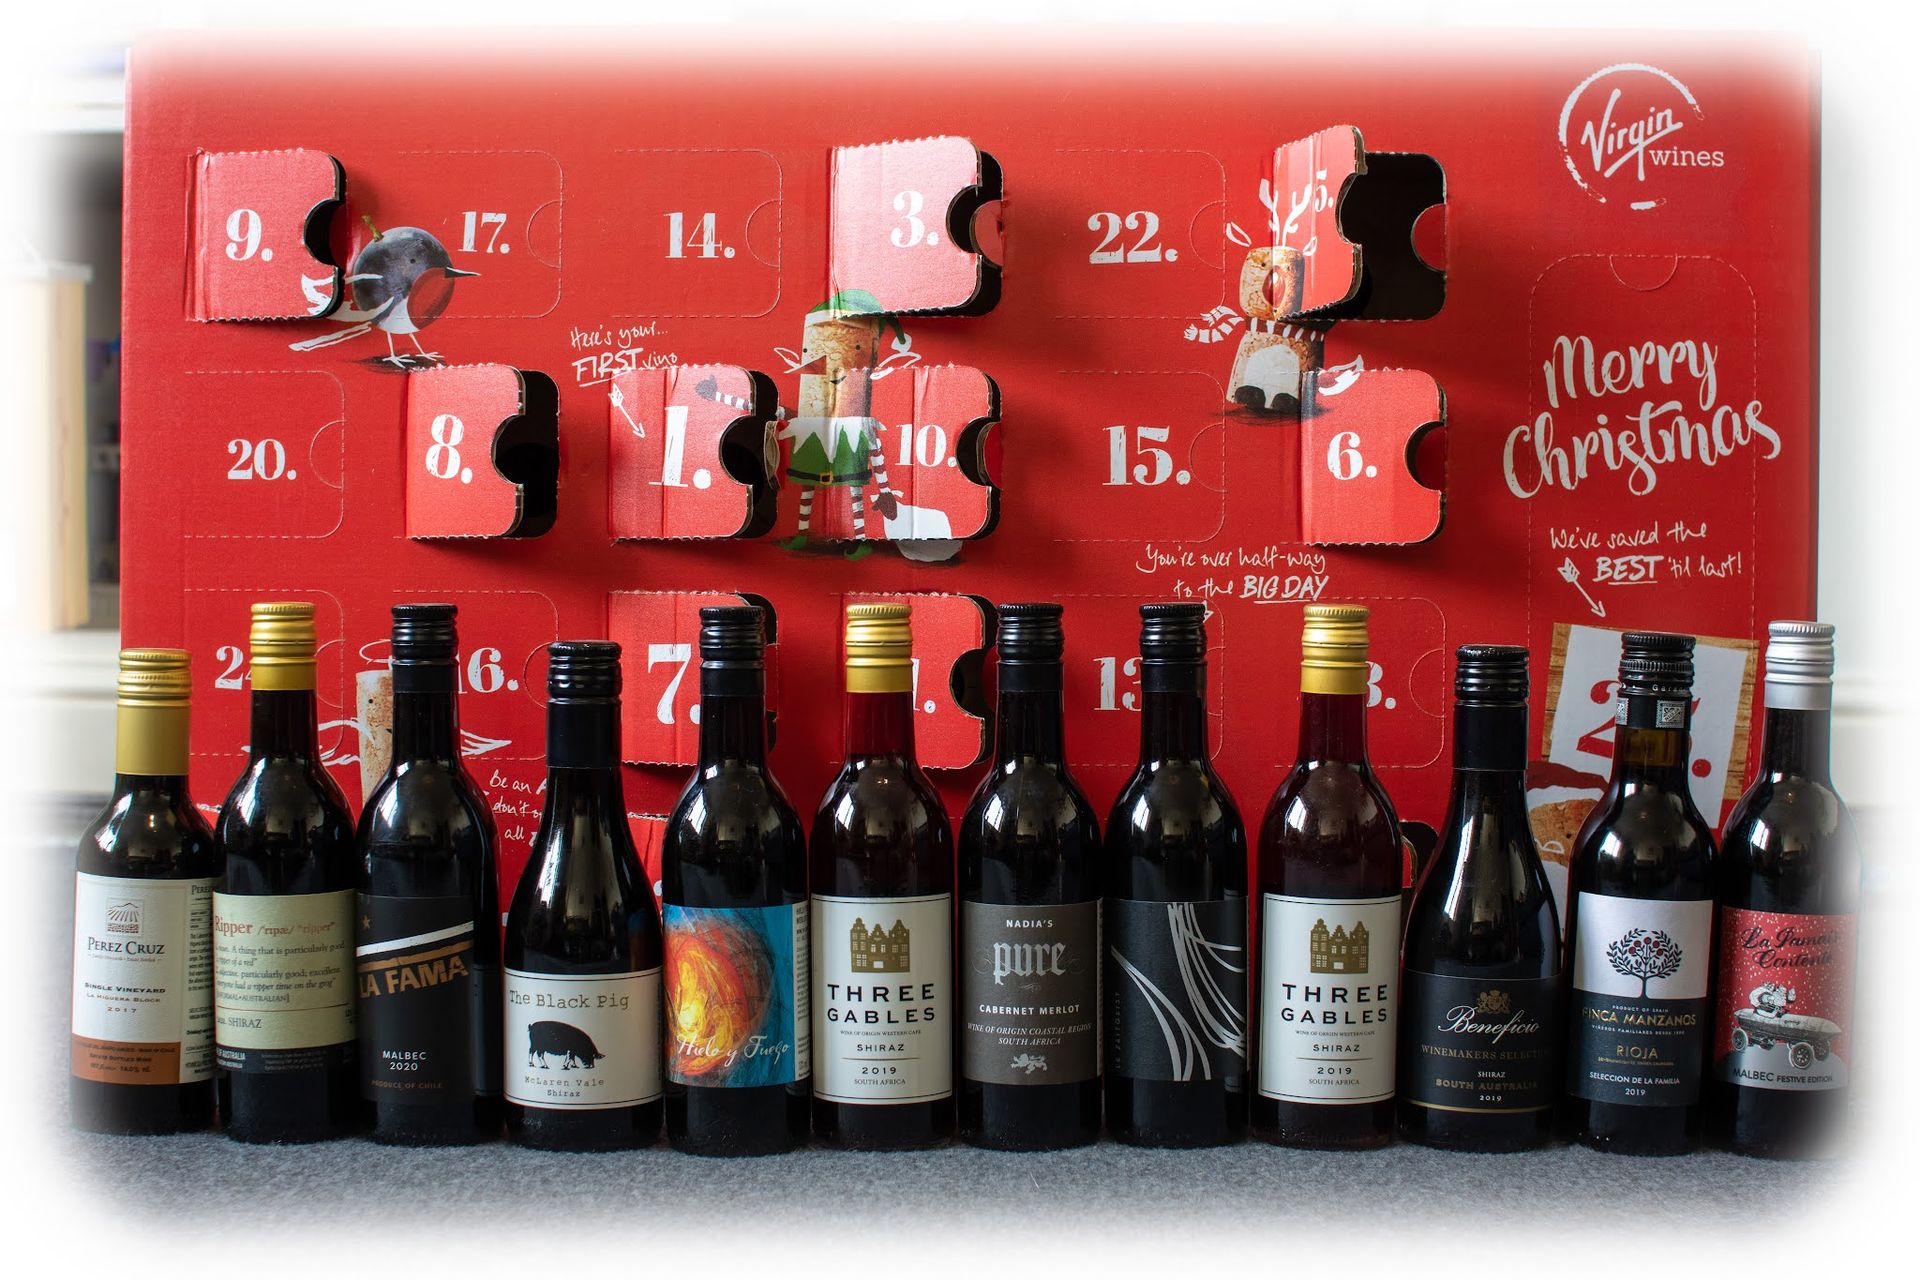 The alcoholic advent calendars offered by Virgin Wines consist of liquor, beer, and wine. You may select miniature bottles of red, white, or a combination of the two wines from the three available. While I have reduced my alcohol consumption in recent years, I do enjoy the occasional glass of red wine, which makes the red wine advent calendar an ideal fit for me. 